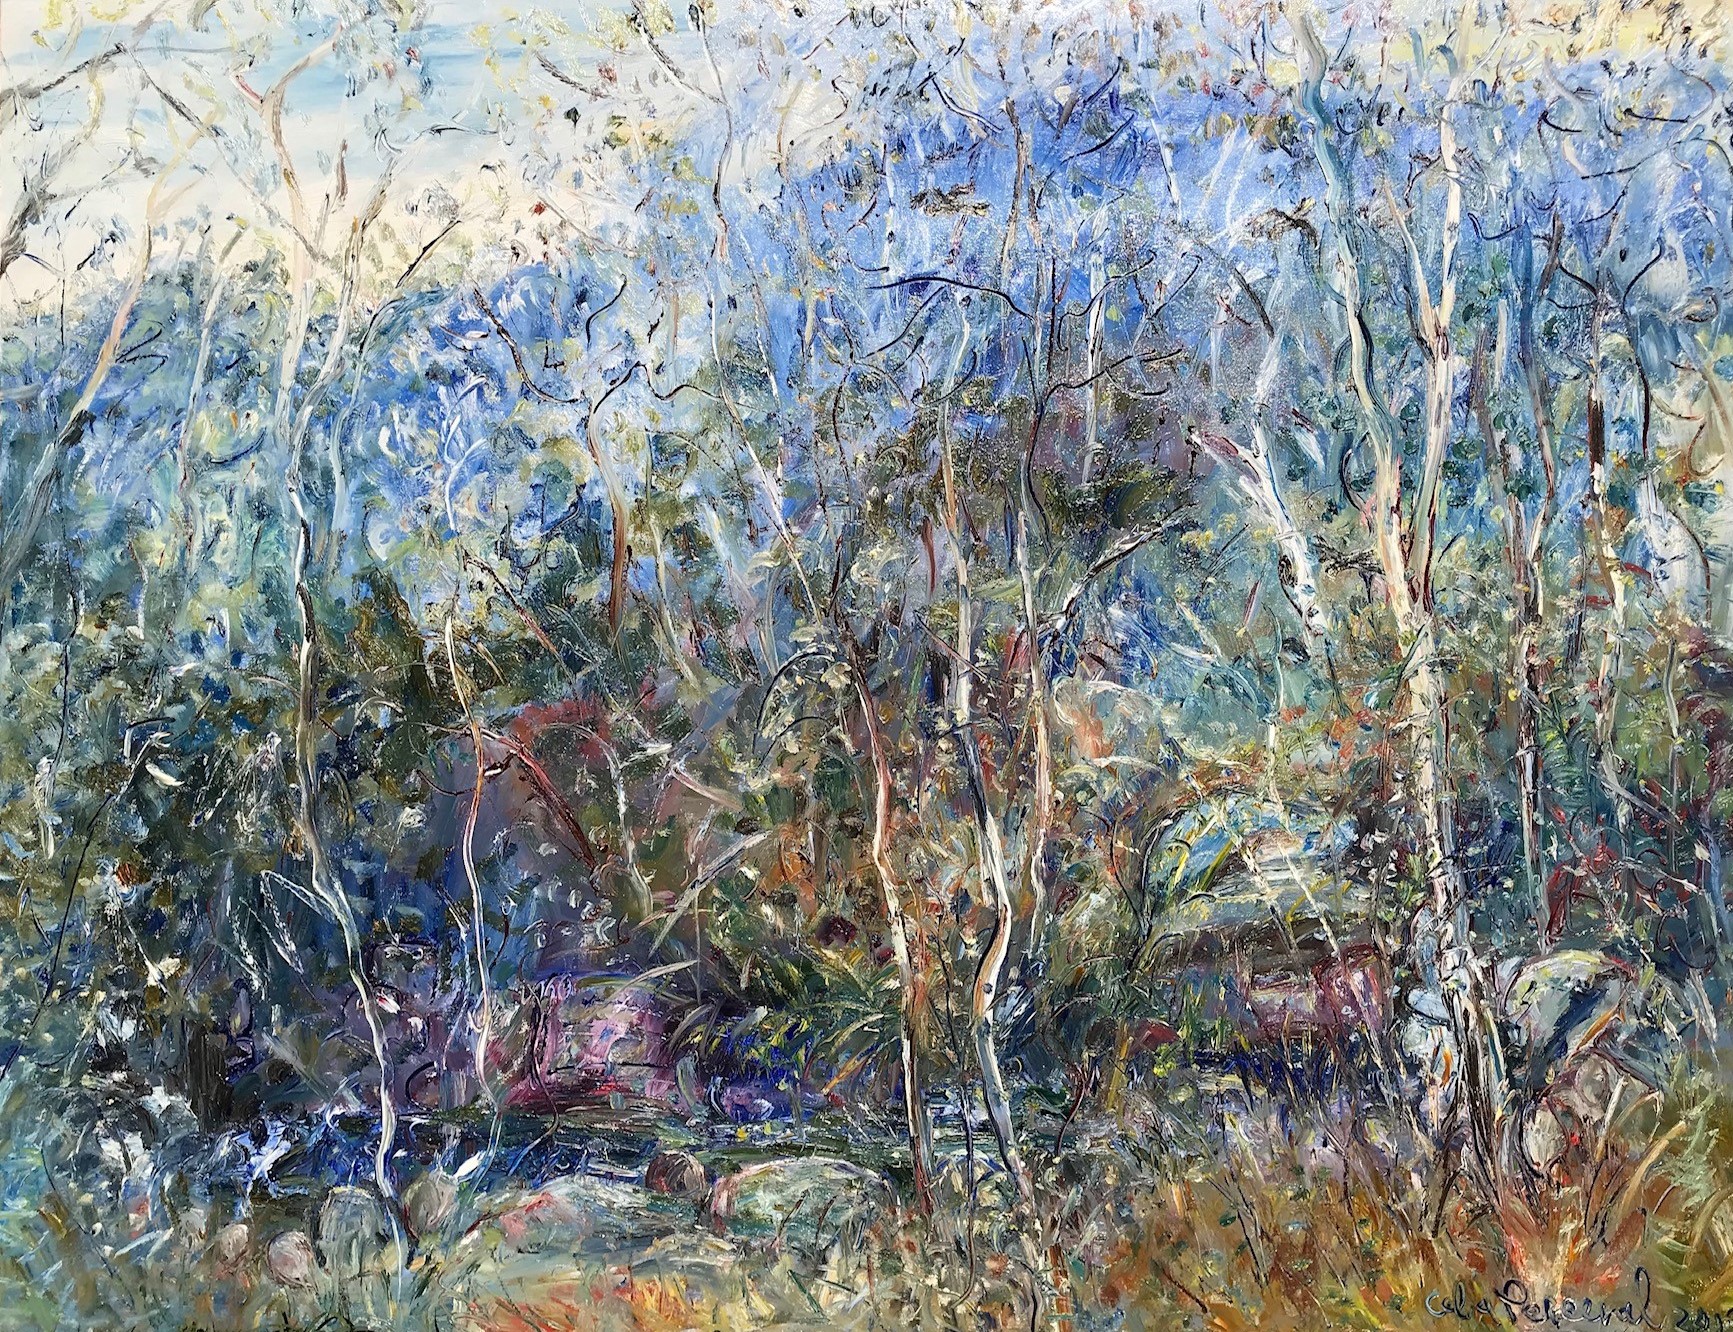 Celia Perceval 'Black Cockatoos Deep in the Gully with Rock Pools on Bells Creek' oil on canvas 153 x 198cm $44,500